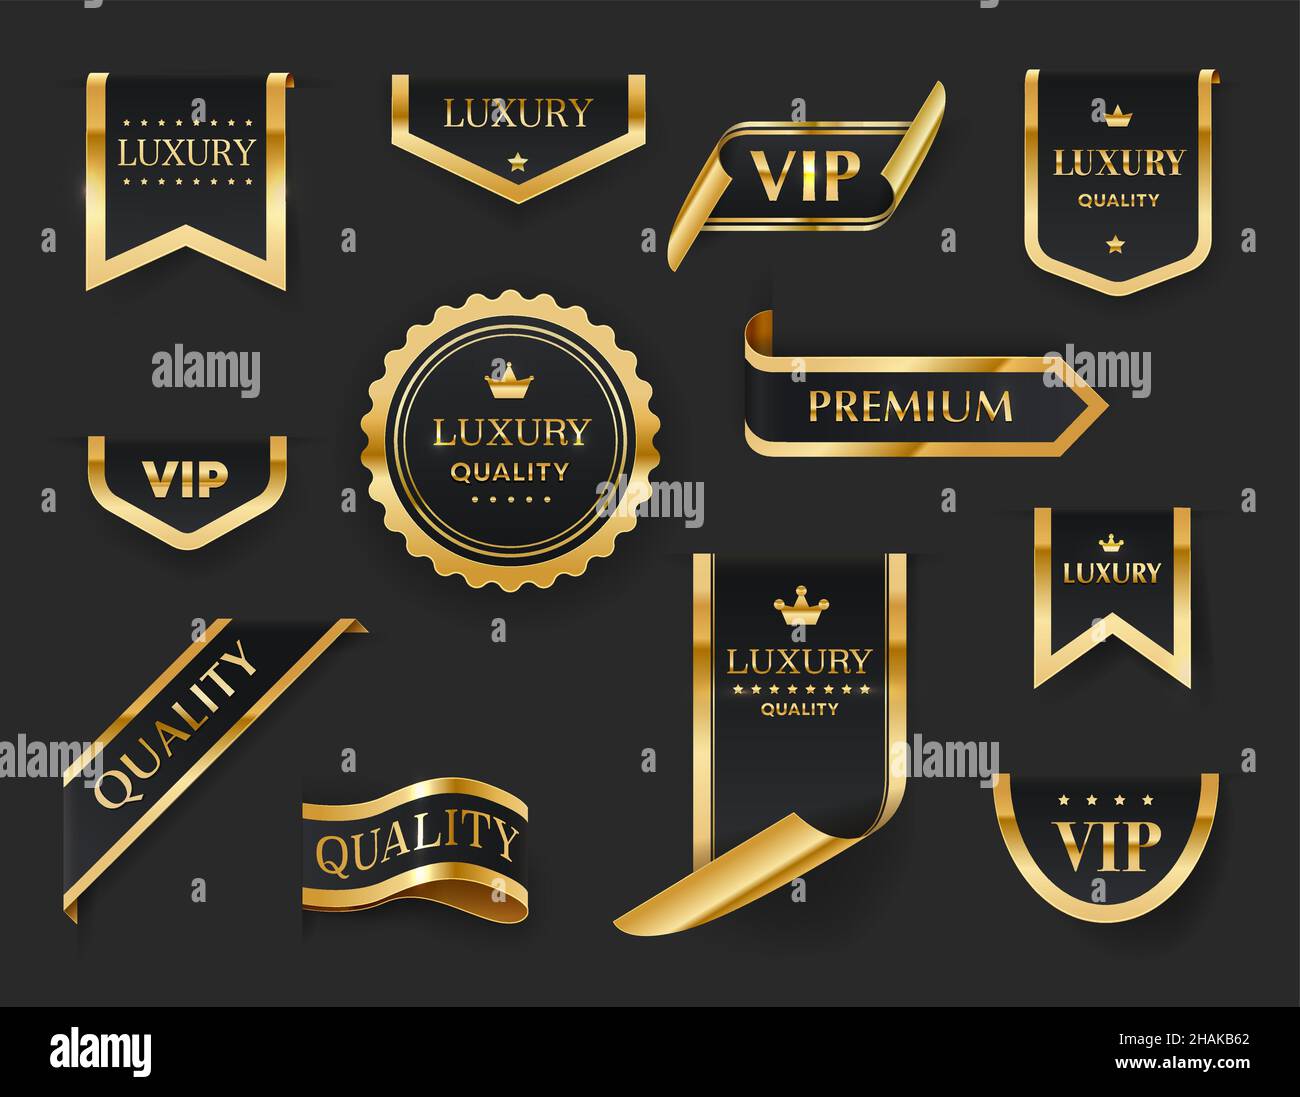 Luxury Vip Premium Golden Labels Ribbons Badges And Stickers Gold